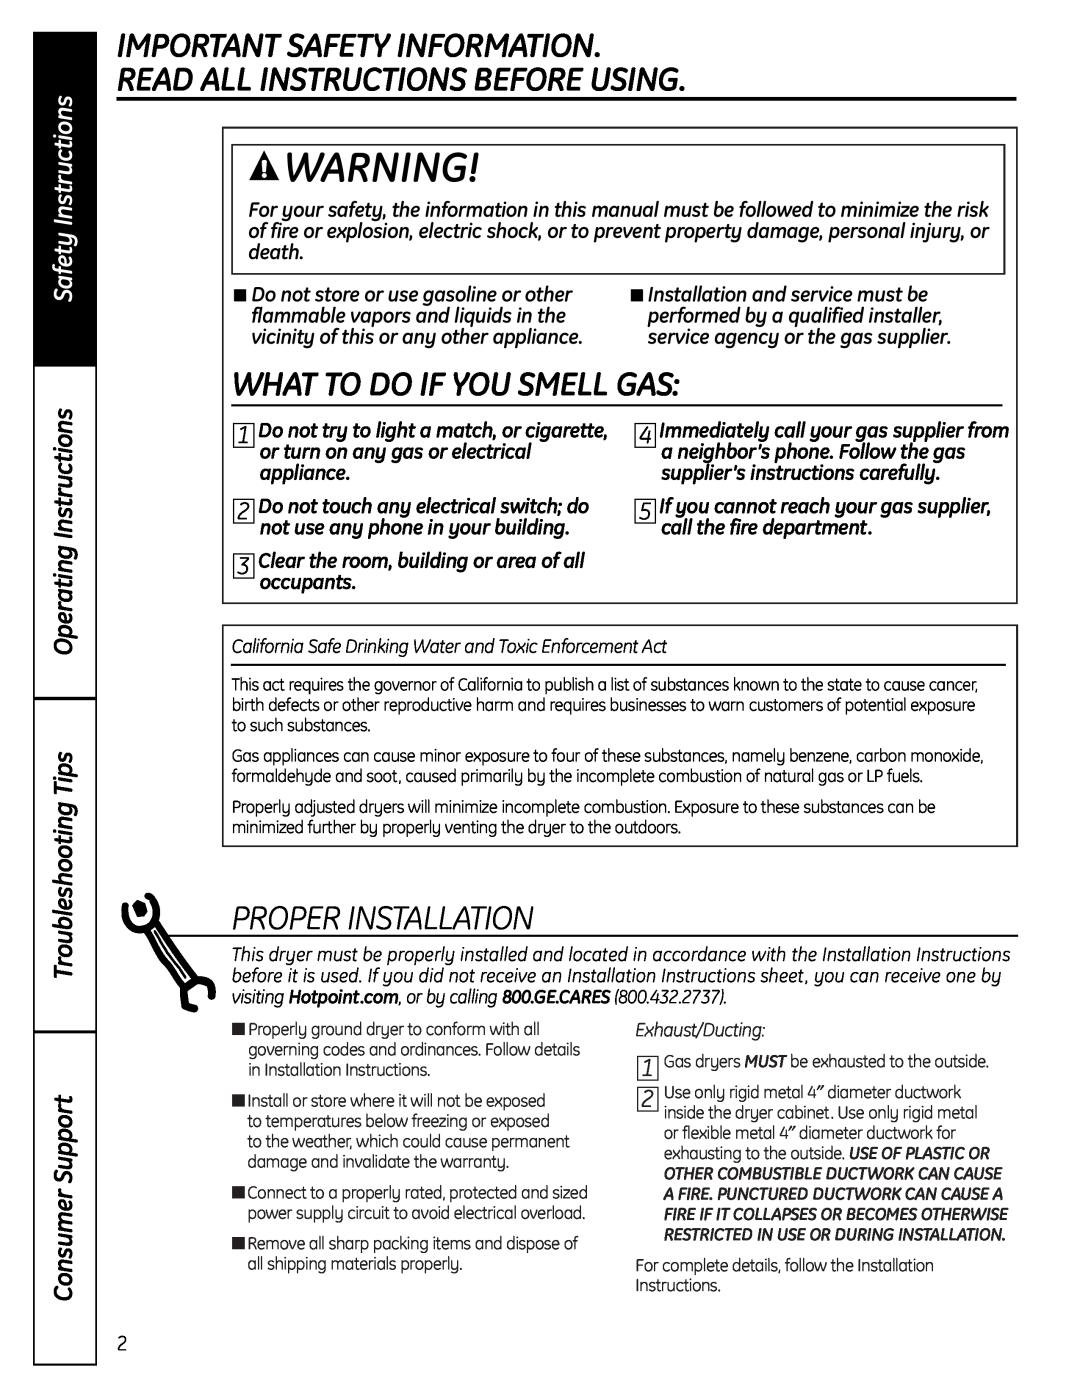 Hotpoint NBXR333 owner manual Important Safety Information Read All Instructions Before Using, What To Do If You Smell Gas 